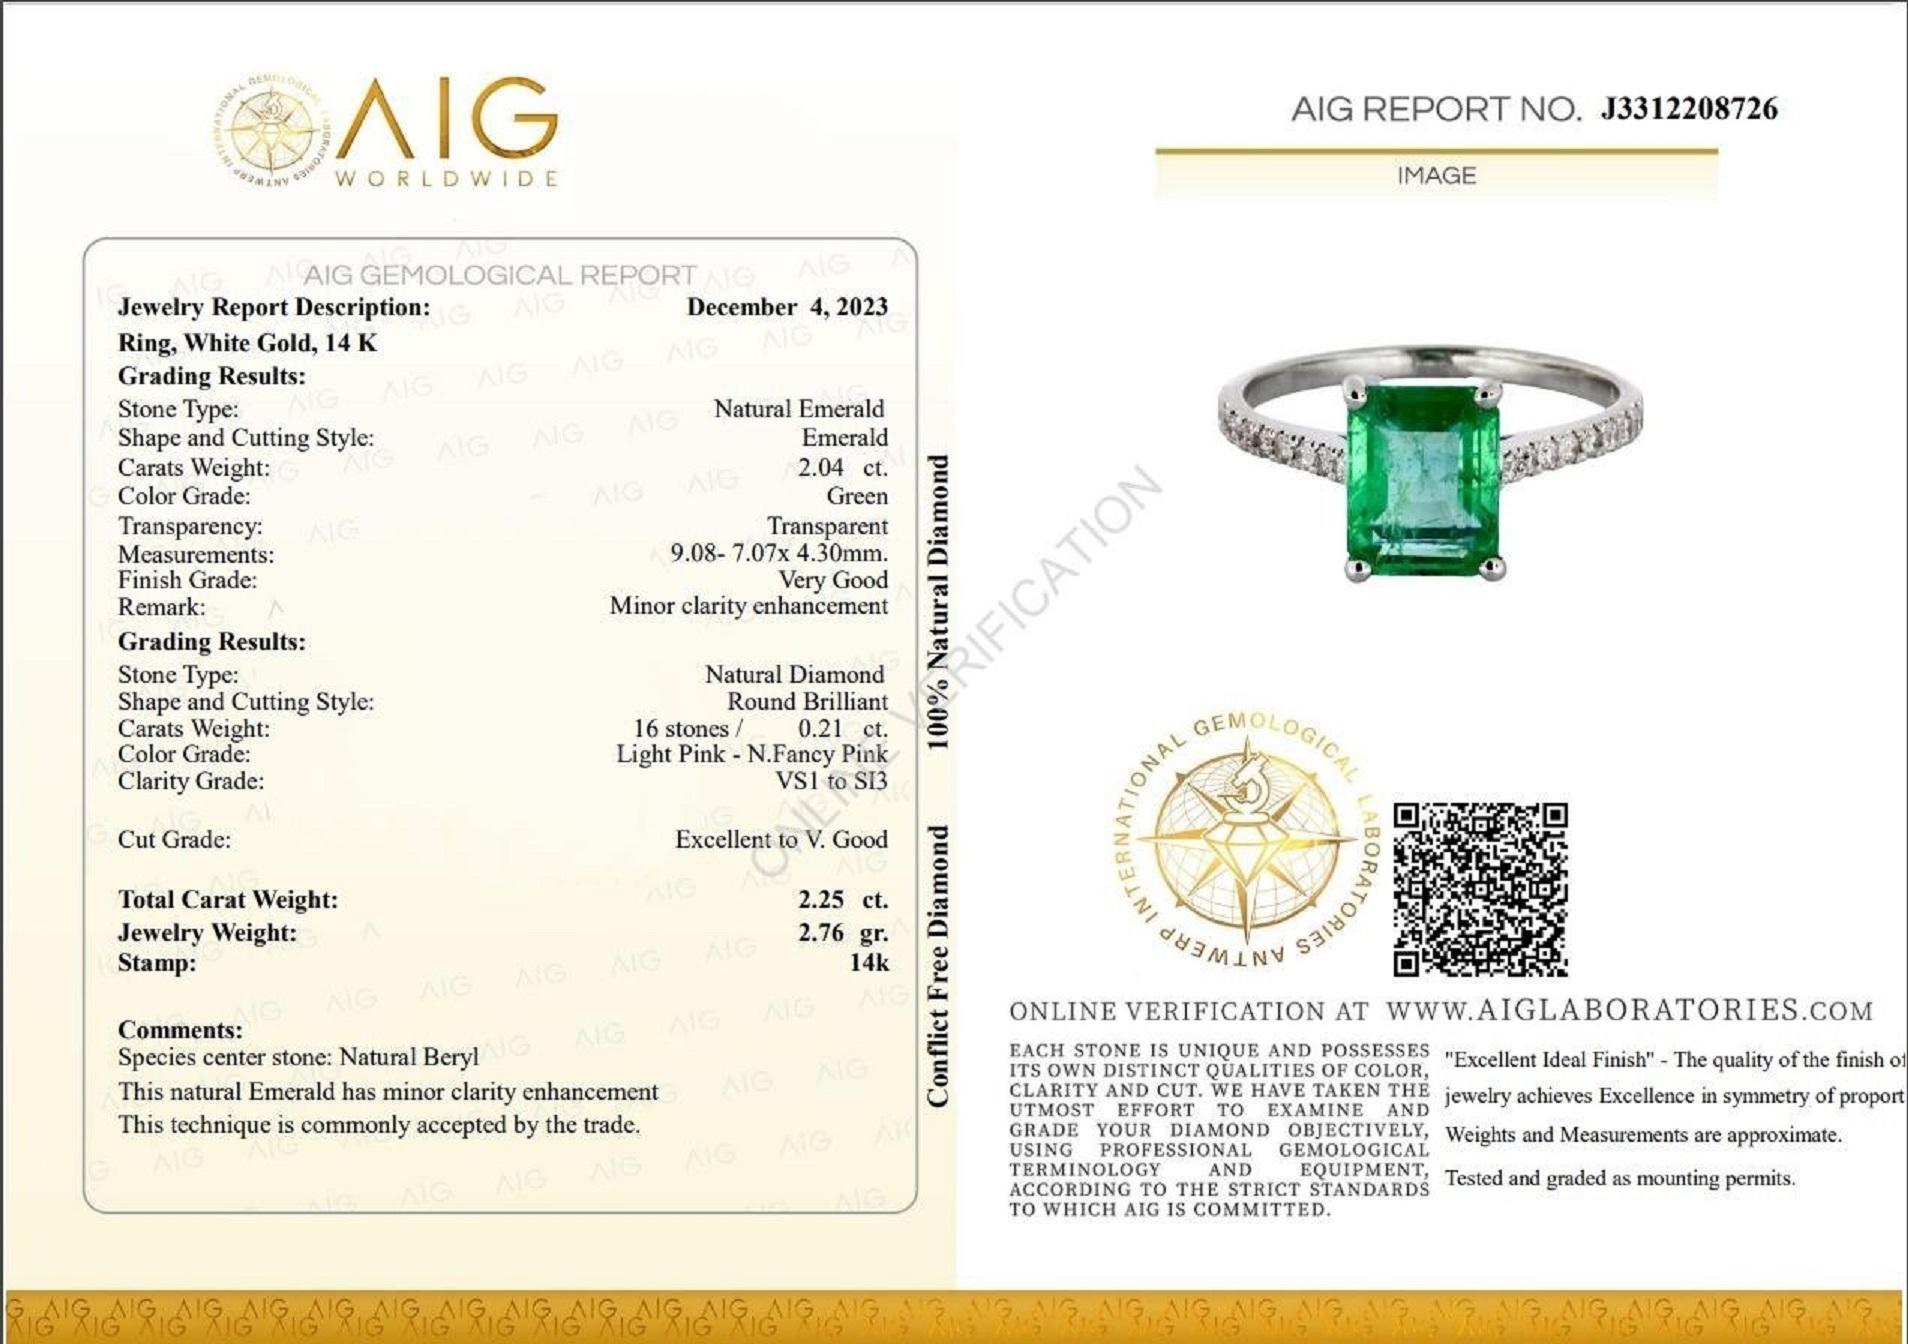 Ring can be resized free of charge prior to shipping out.
Ring Size: 56 EU

Center Natural Emerald:
Weight: 2.05 ct
Colour: Green
Shape: Emerald
Minor clarity enhancement


Side Stone Diamonds:
Weight: 0.21 ct / 16 stones
Color: Light Pink - N.Fancy